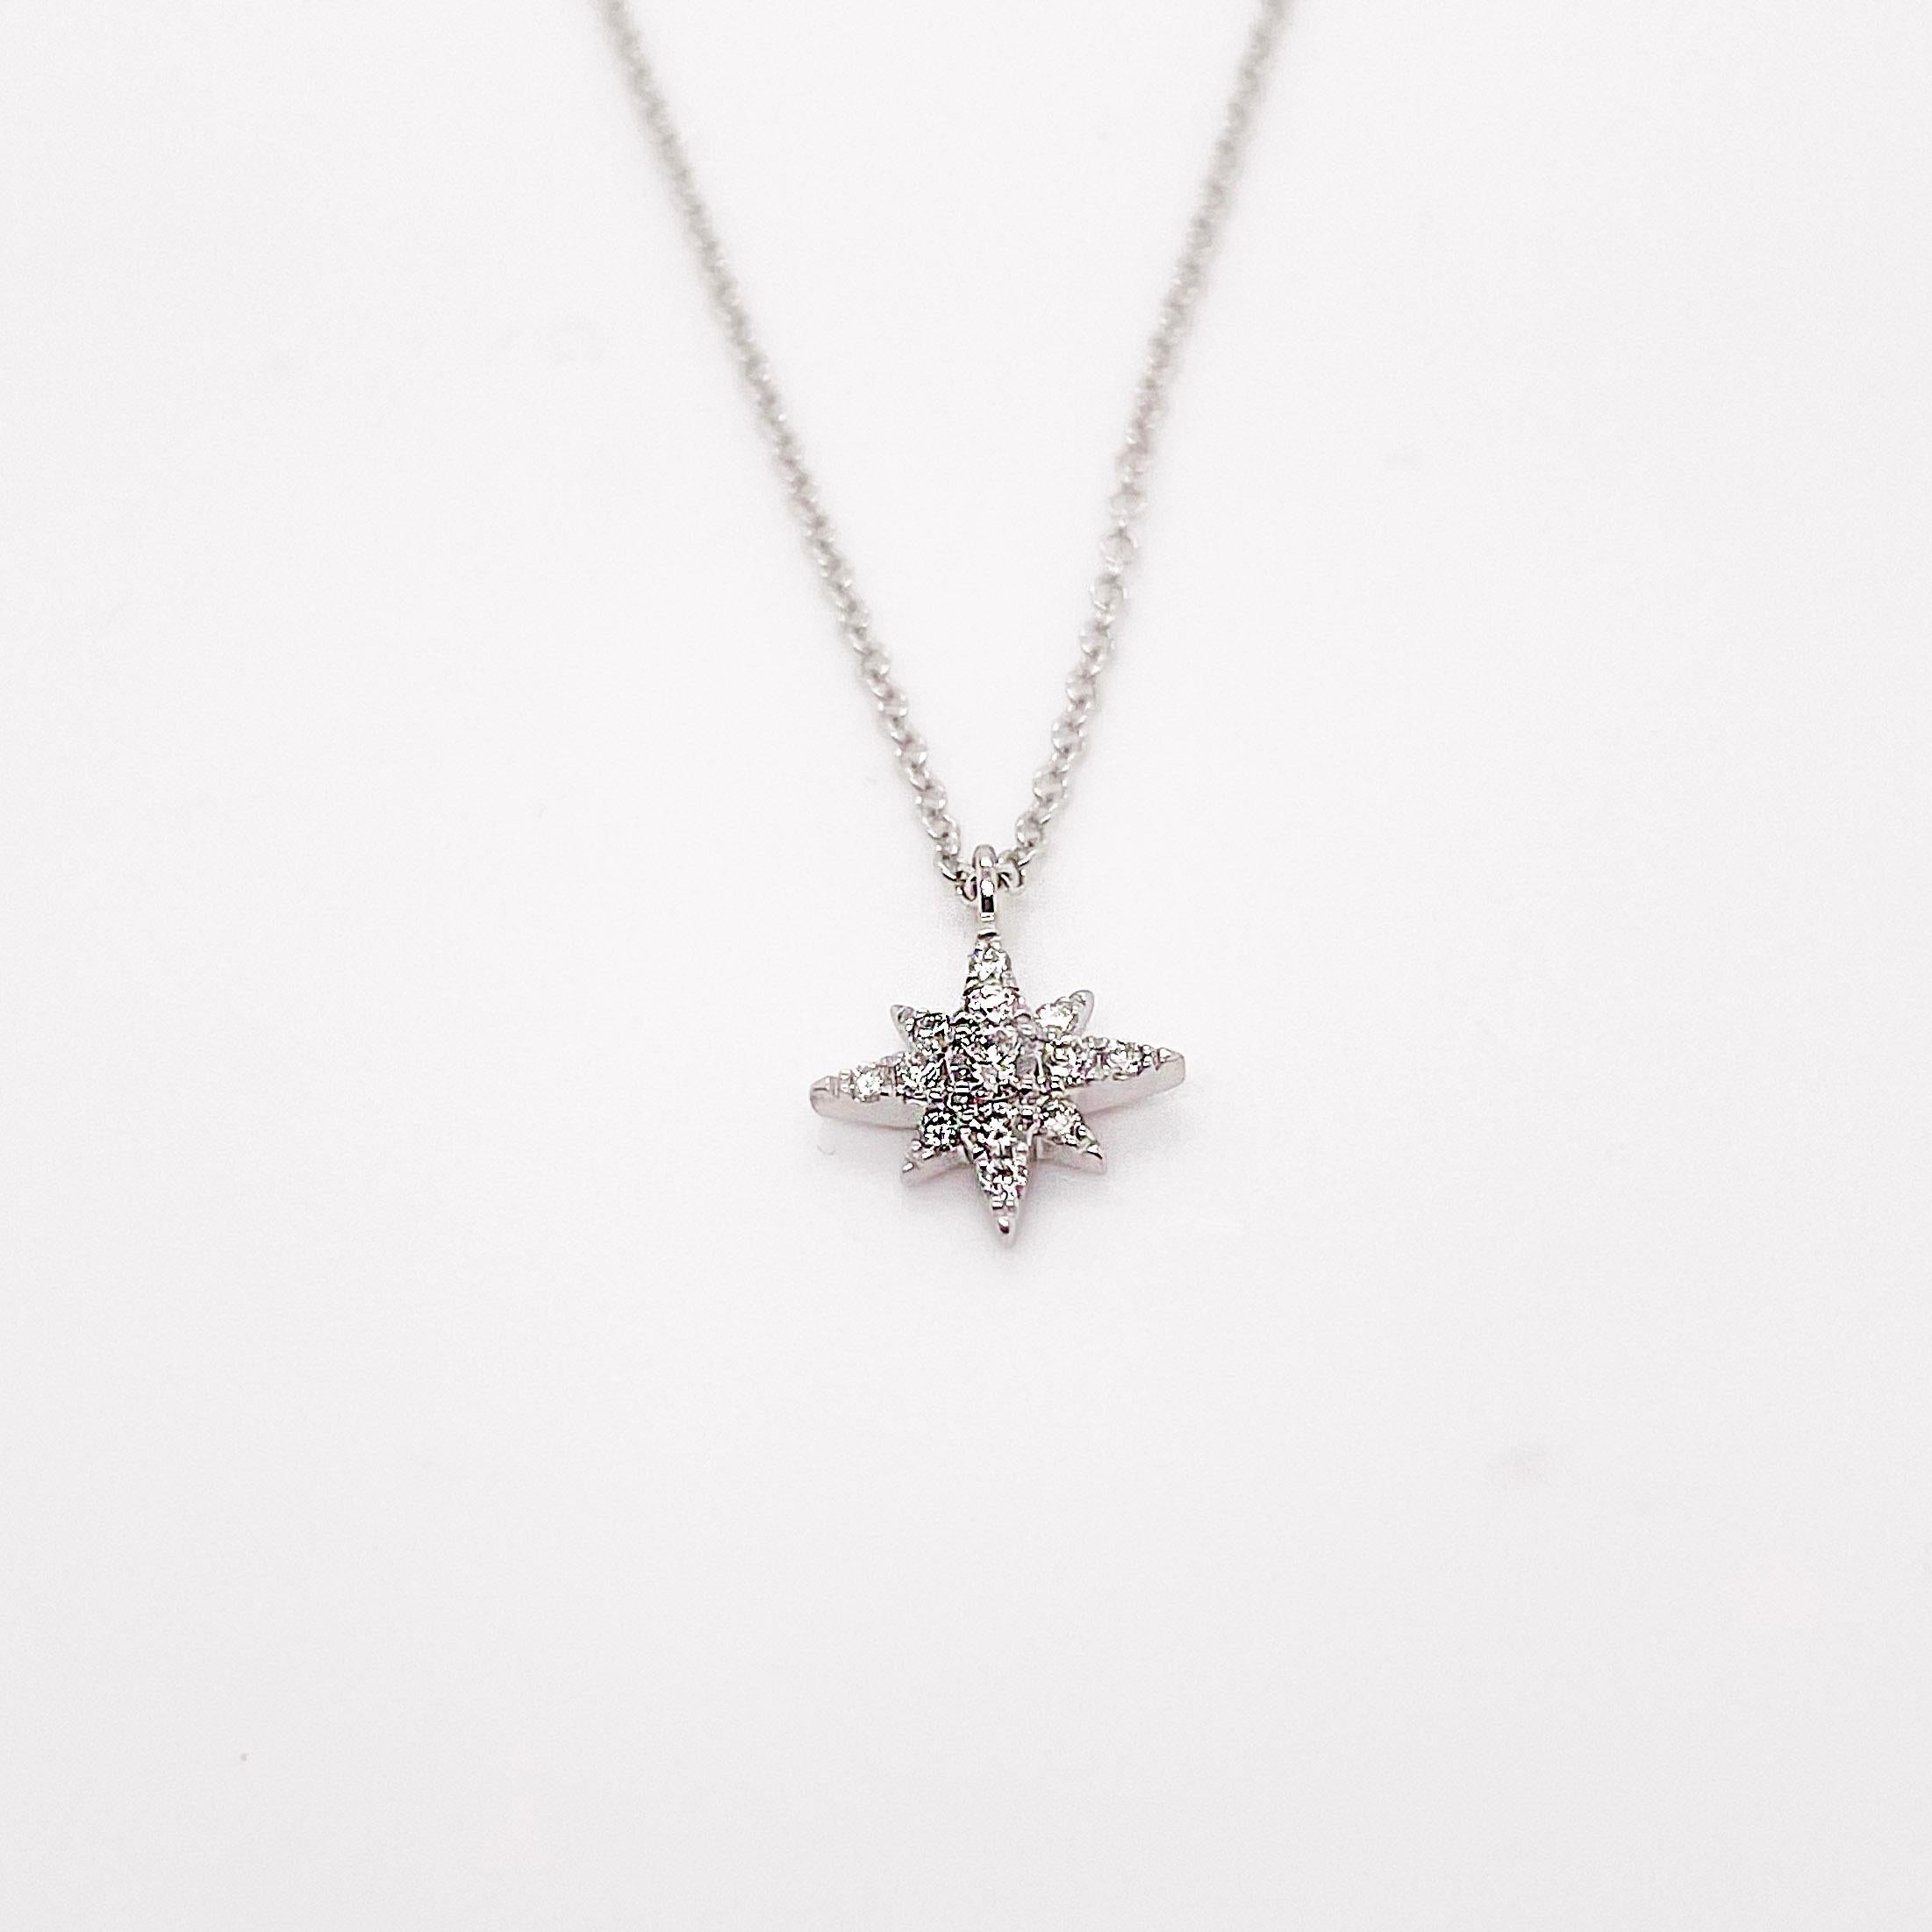 Three words to describe this necklace is cute, timeless, and versatile. This classic design is beautiful both on its own or worn in a neck stack. The star on a necklace allows you to always keep a little bit of light close to your heart. The details